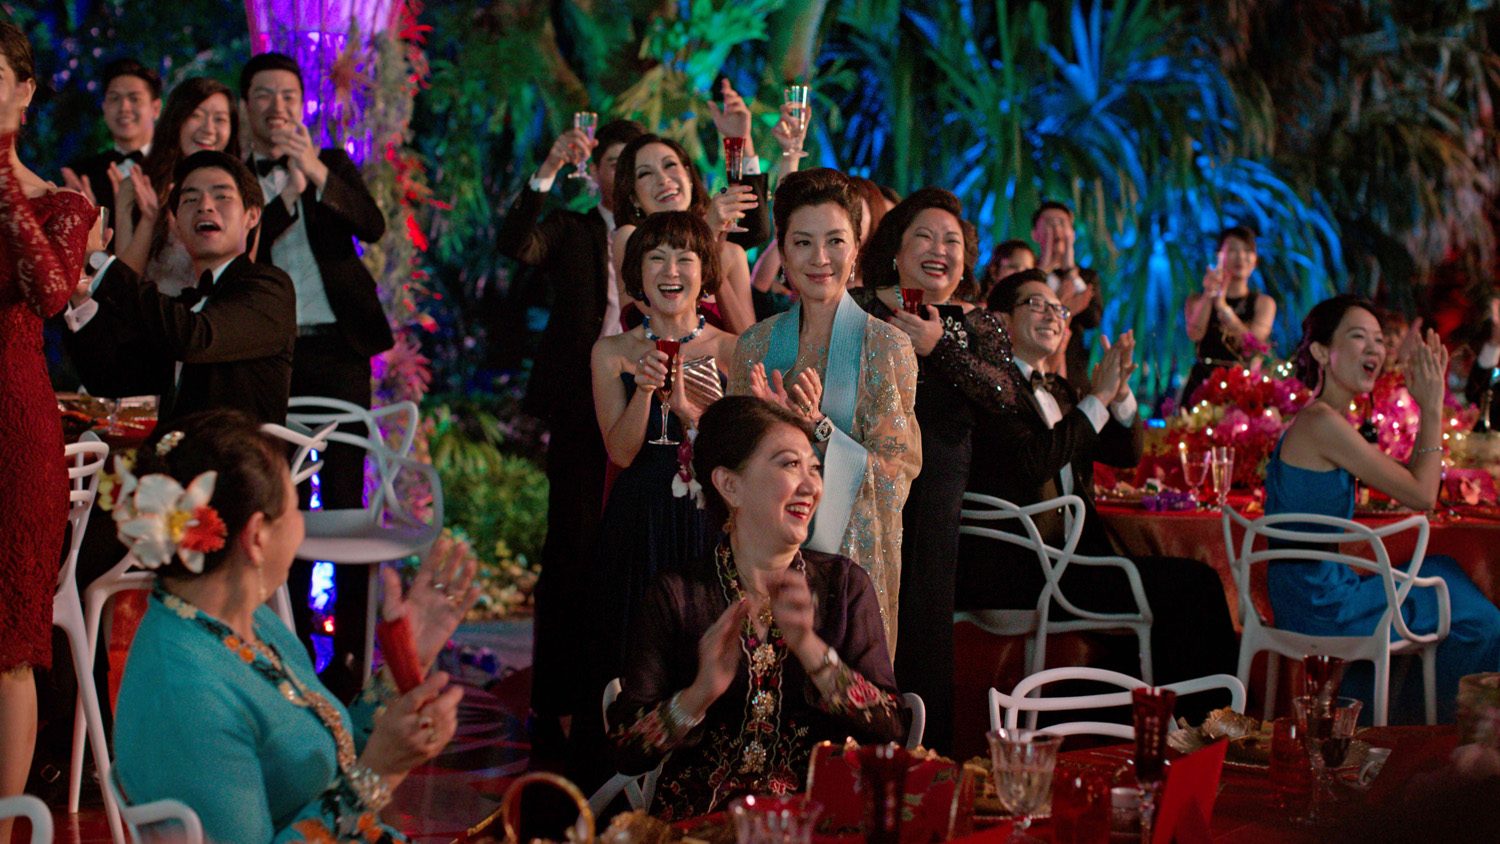 More than music: The ‘Crazy Rich Asians’ soundtrack hits all the right notes